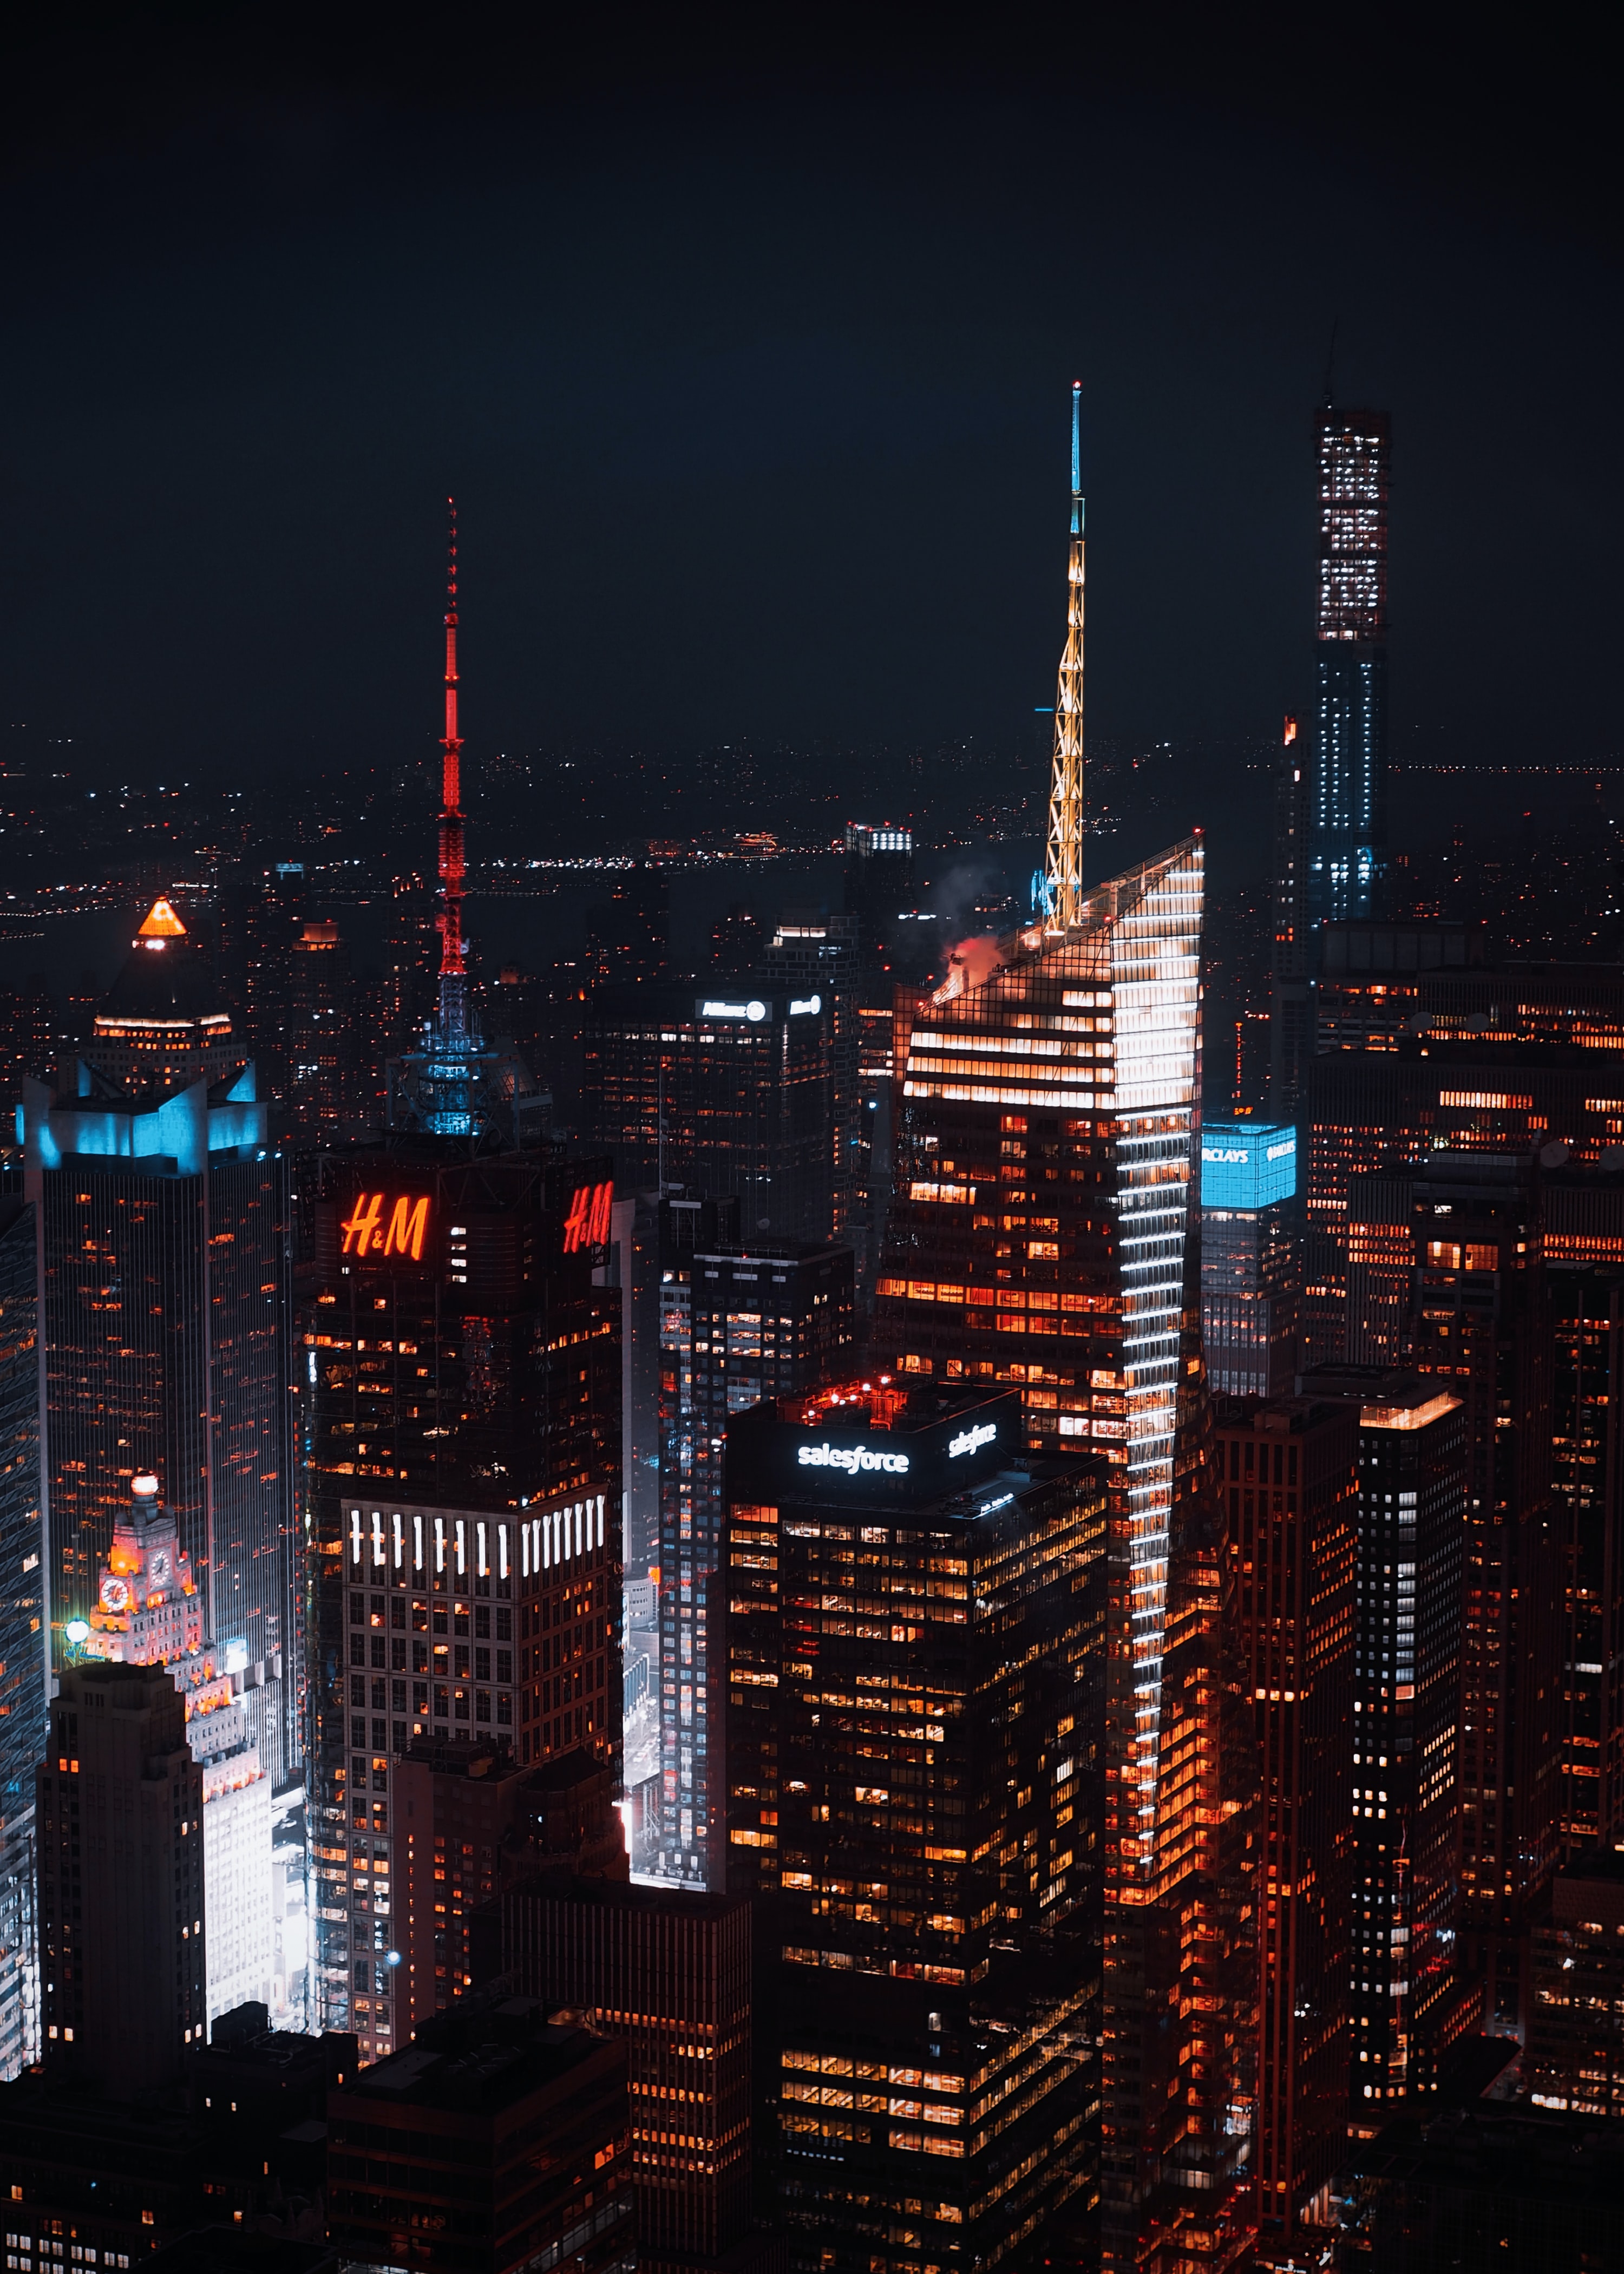 Full HD Wallpaper architecture, cities, night, city, building, view from above, skyscrapers